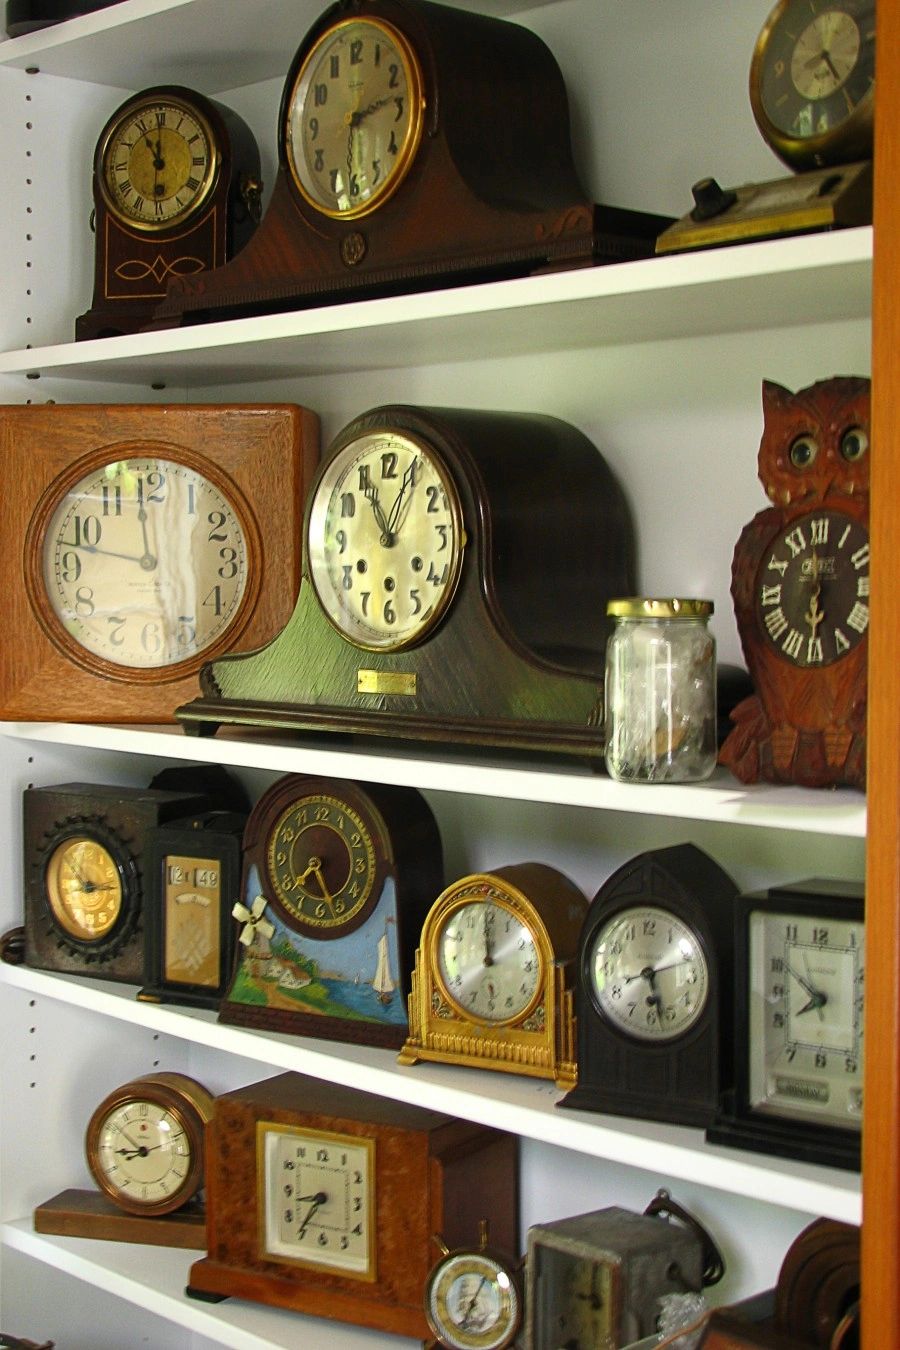 Antique Clocks: A Guide to Value, Styles and Proper Care - Invaluable